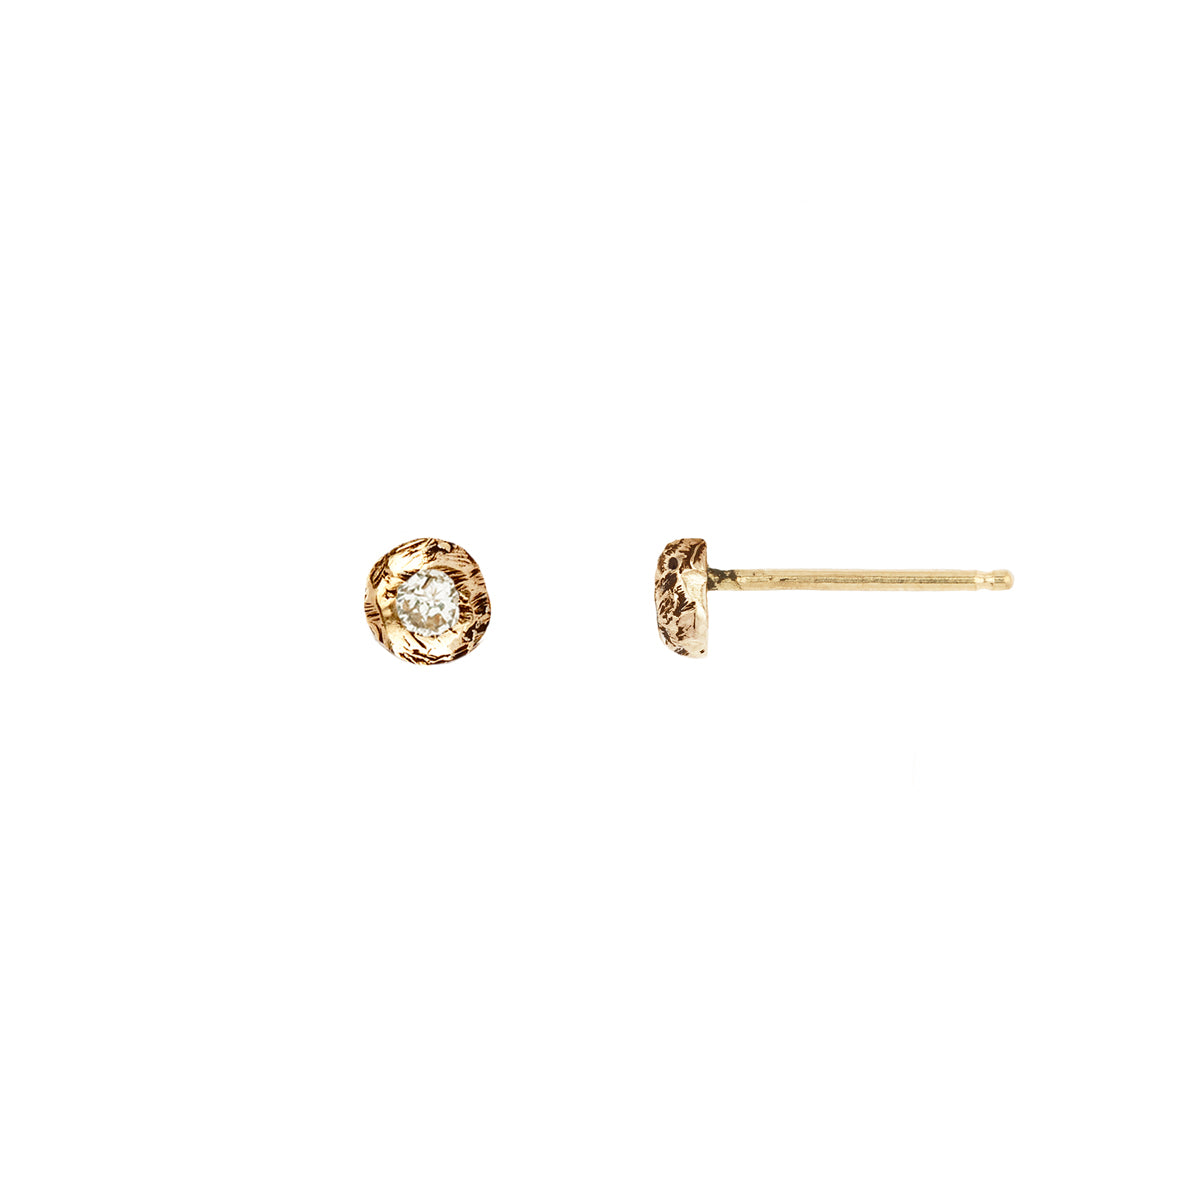 A set of 14k gold stud earrings set with a large white diamond.